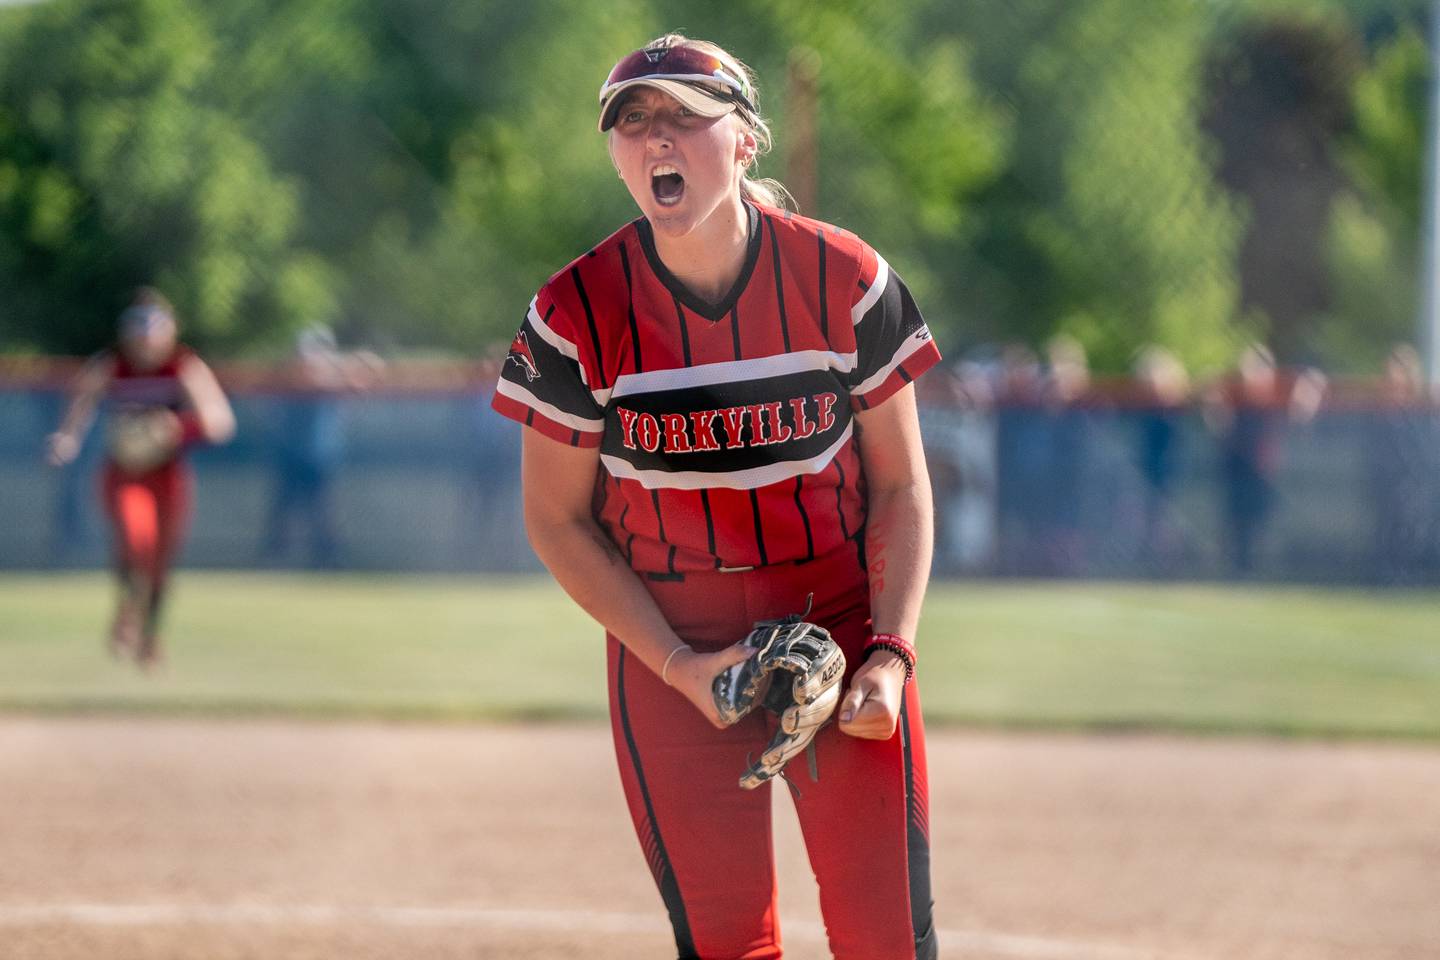 Yorkville's Madi Reeves (2) reacts after ending the game with a strike out to win the 4A sectional championship against Wheaton Warrenville South at Oswego High School on Friday, June 2, 2023.